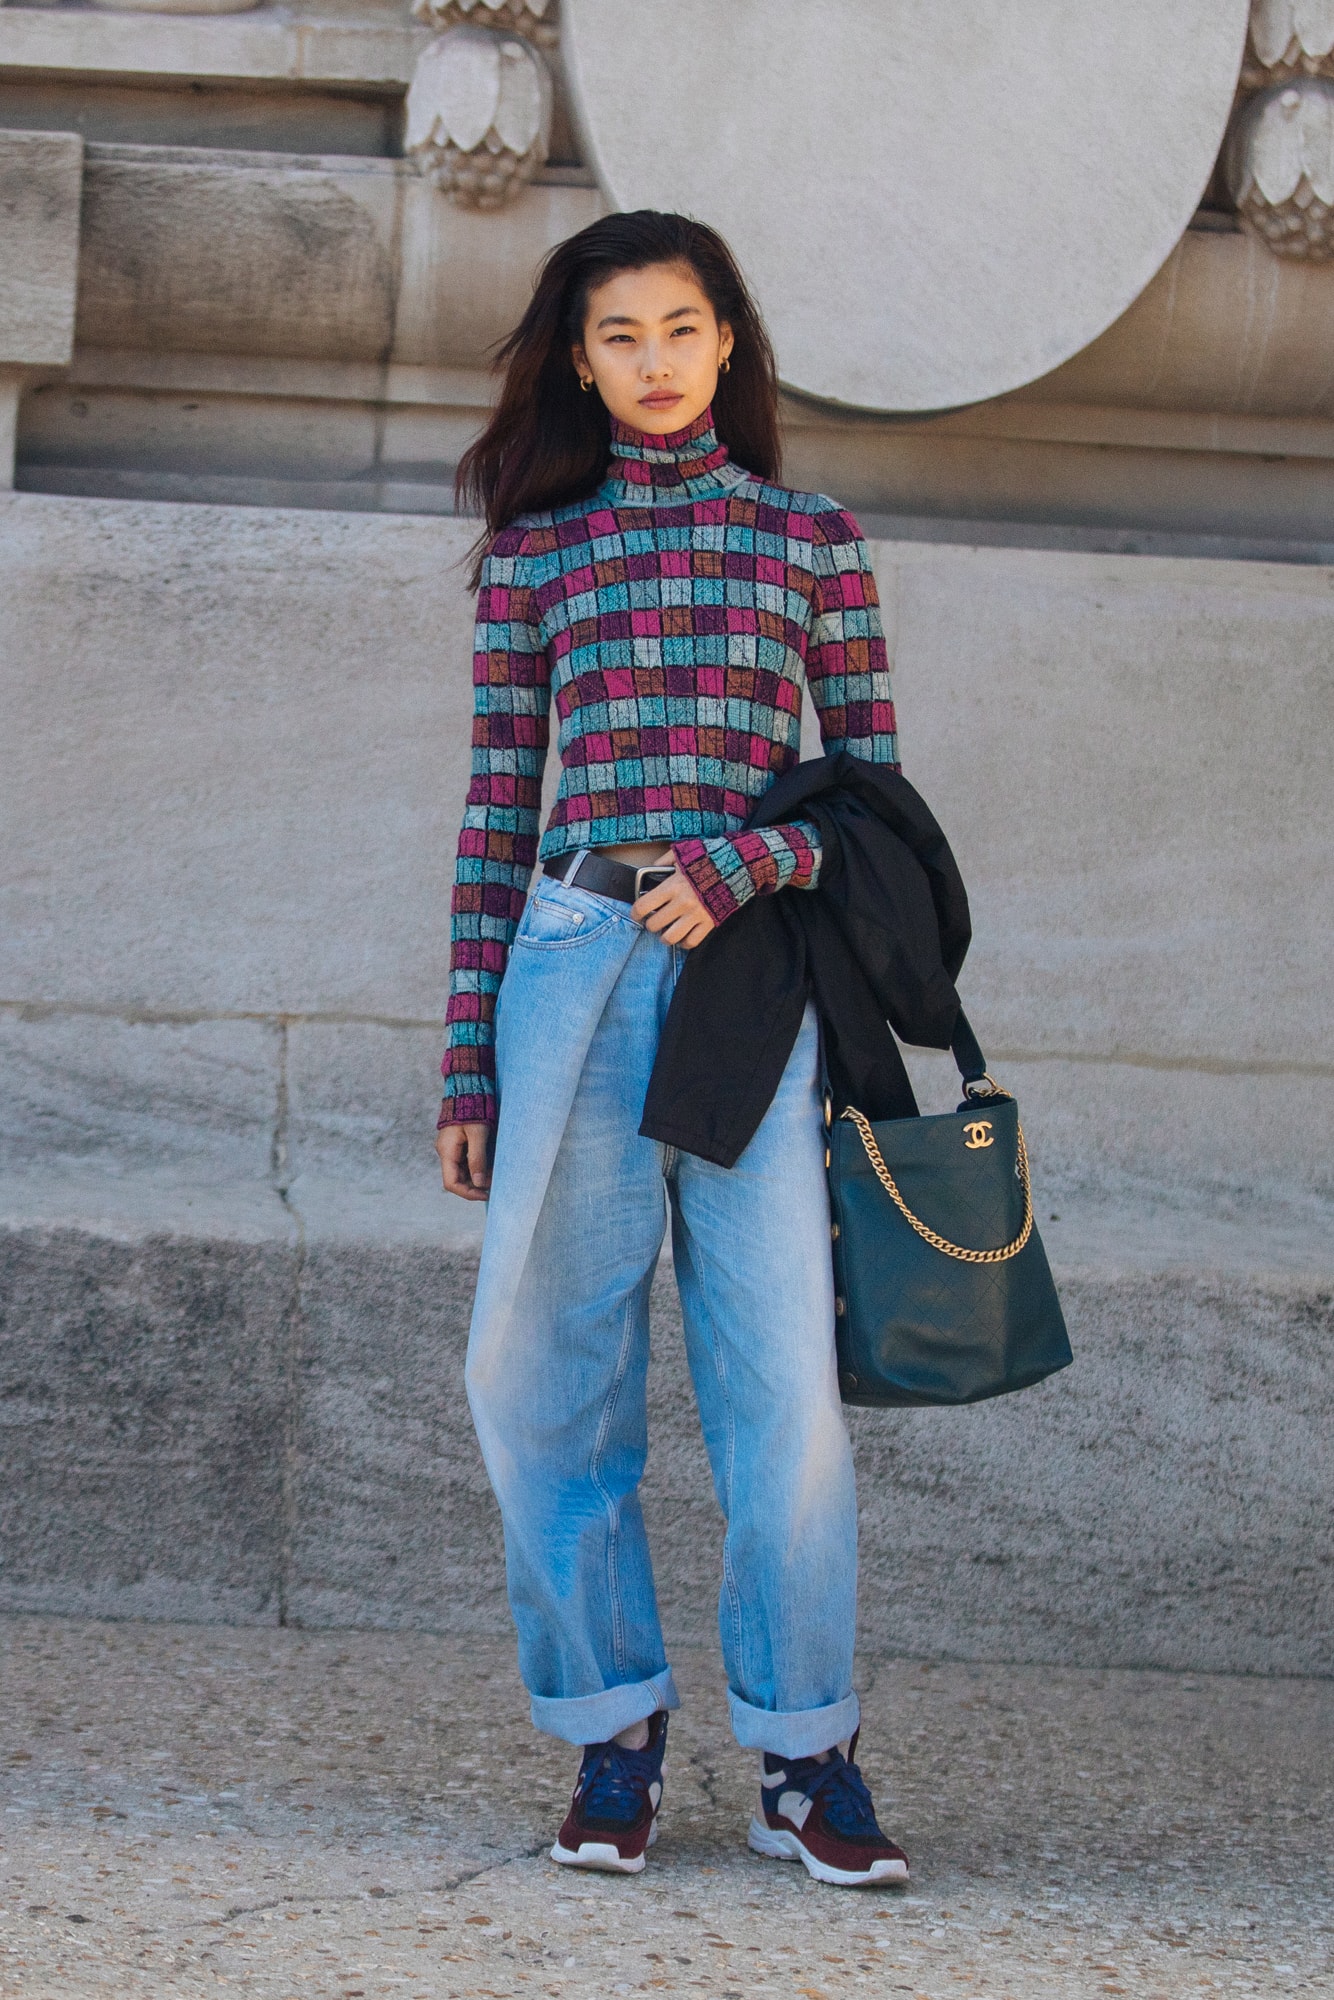 Hoyeon Jung South Korean Model Supermodel Off Duty Fashion Week Outfit Chanel Bag Baggy Jeans Blue Outfit Sneakers